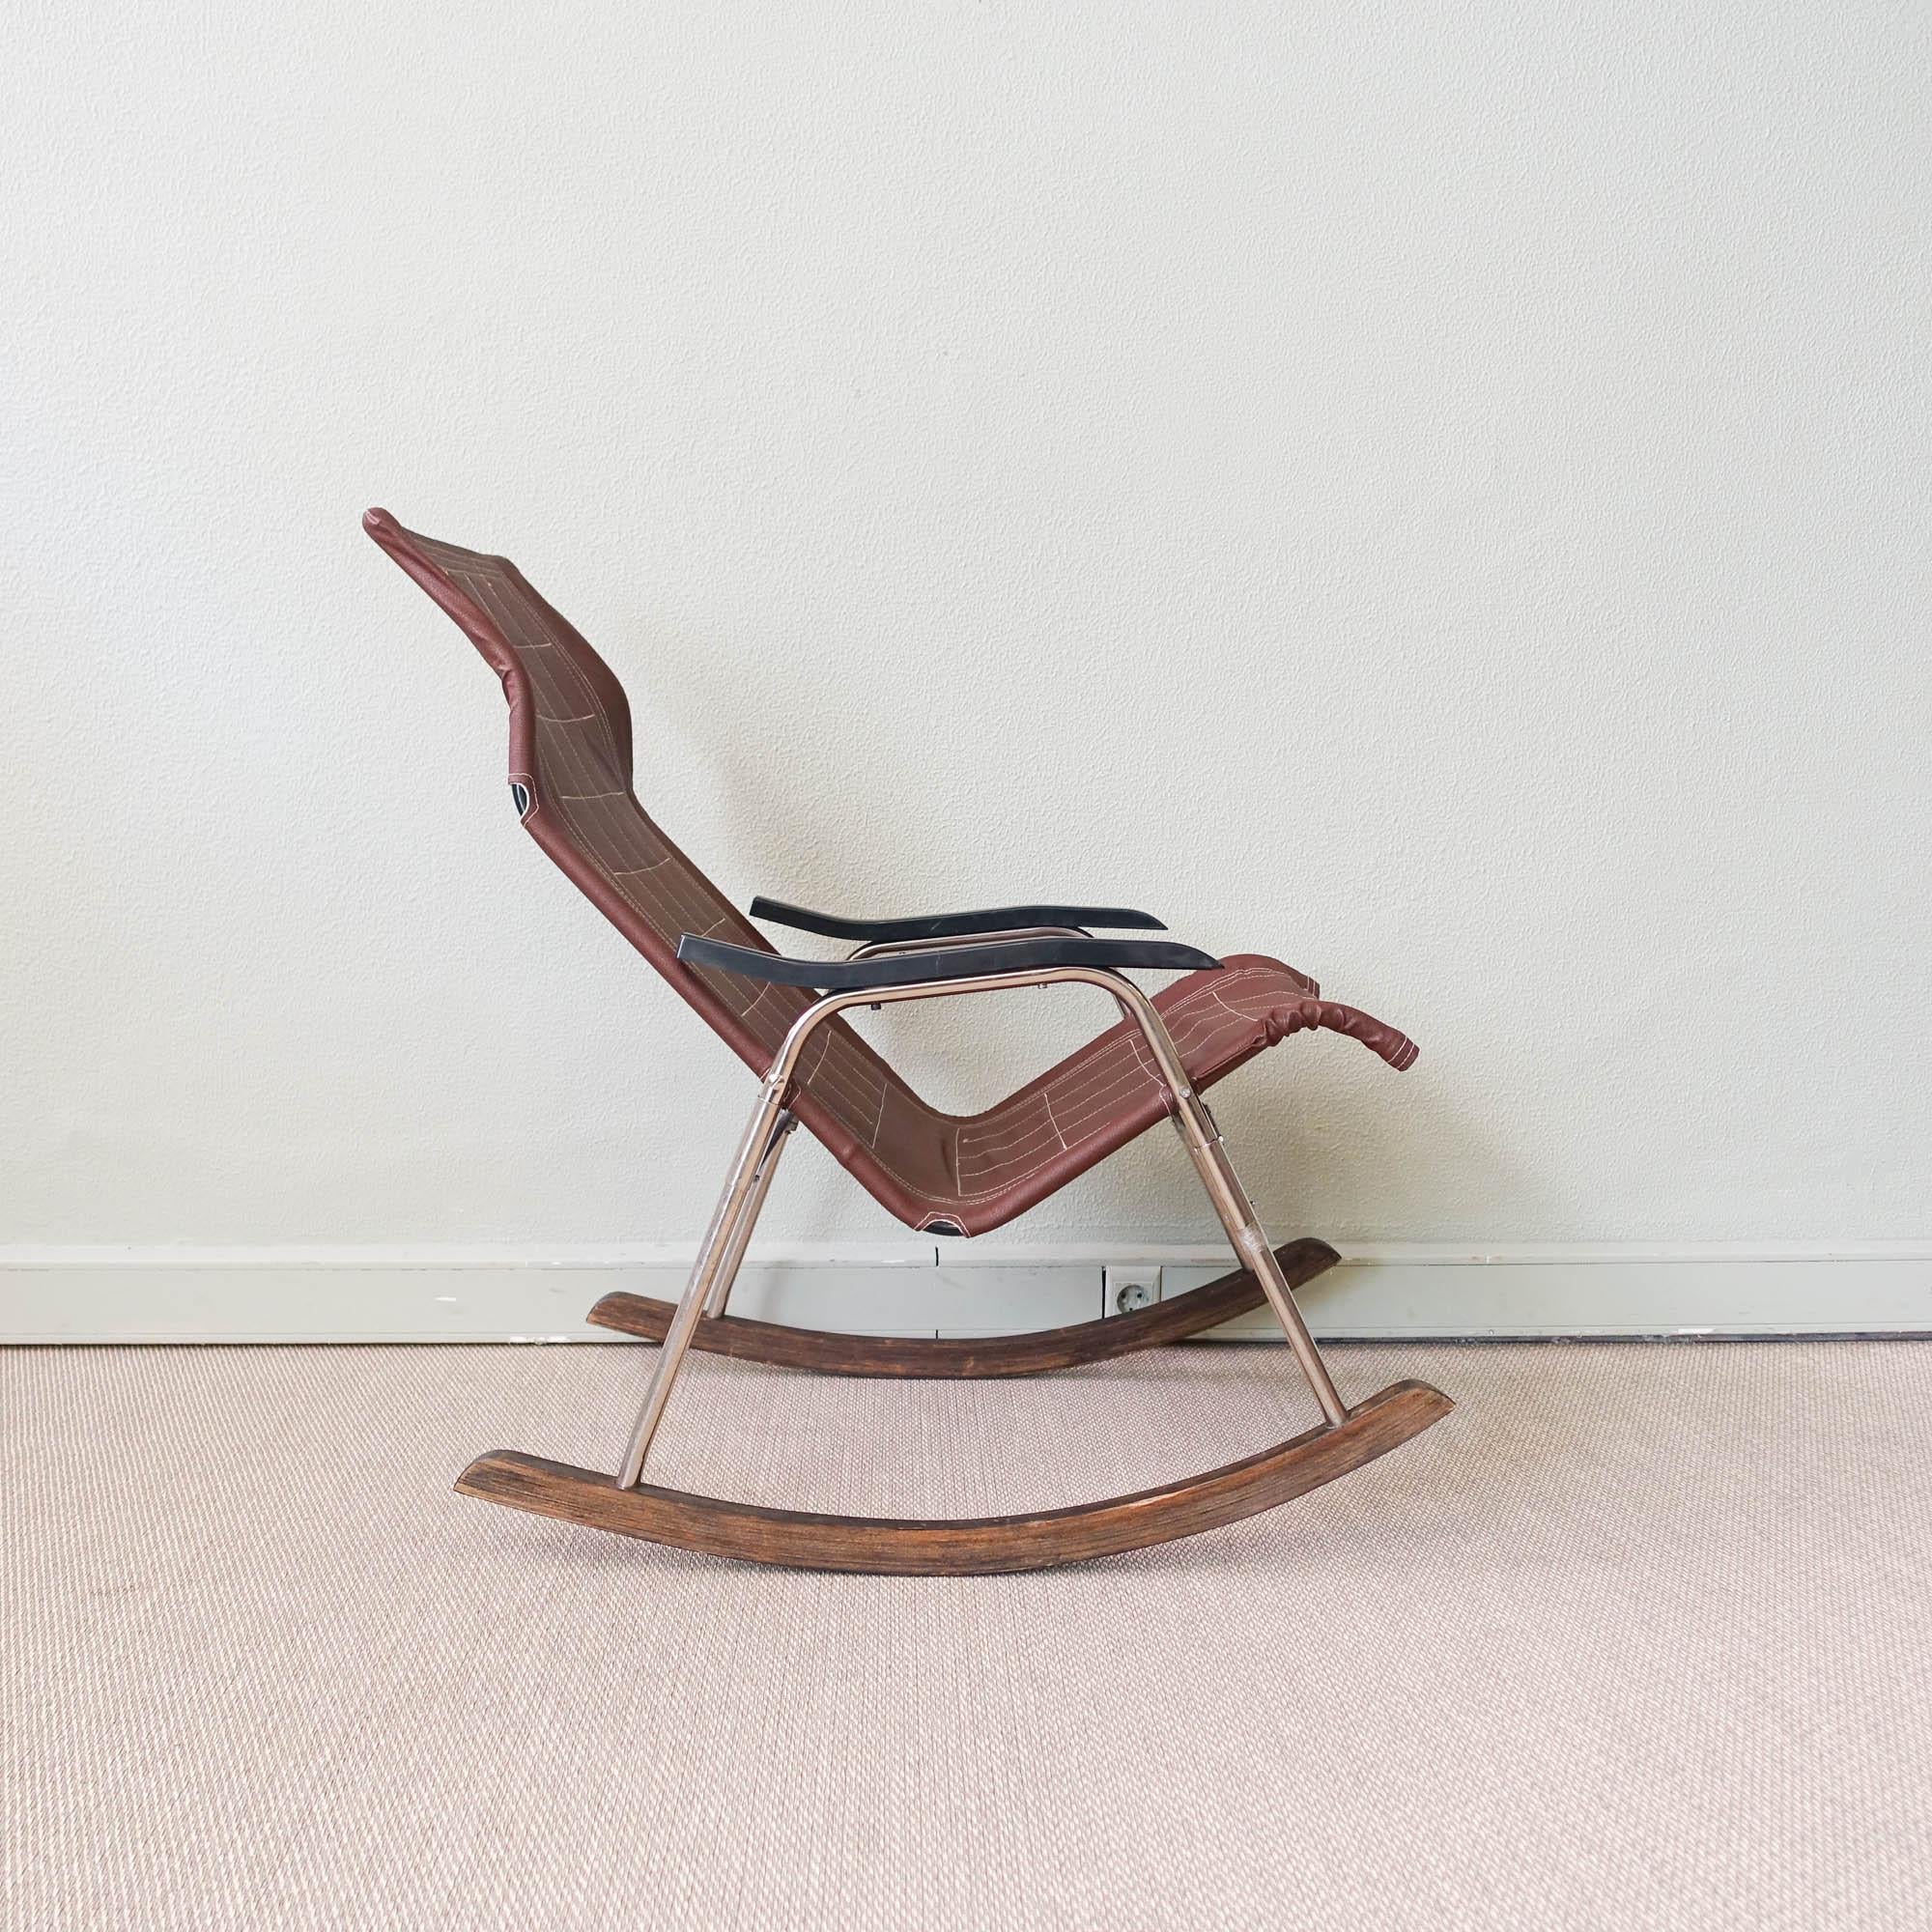 Mid-Century Modern Japanese Foldable Rocking Chair by Takeshi Nii, 1950's For Sale